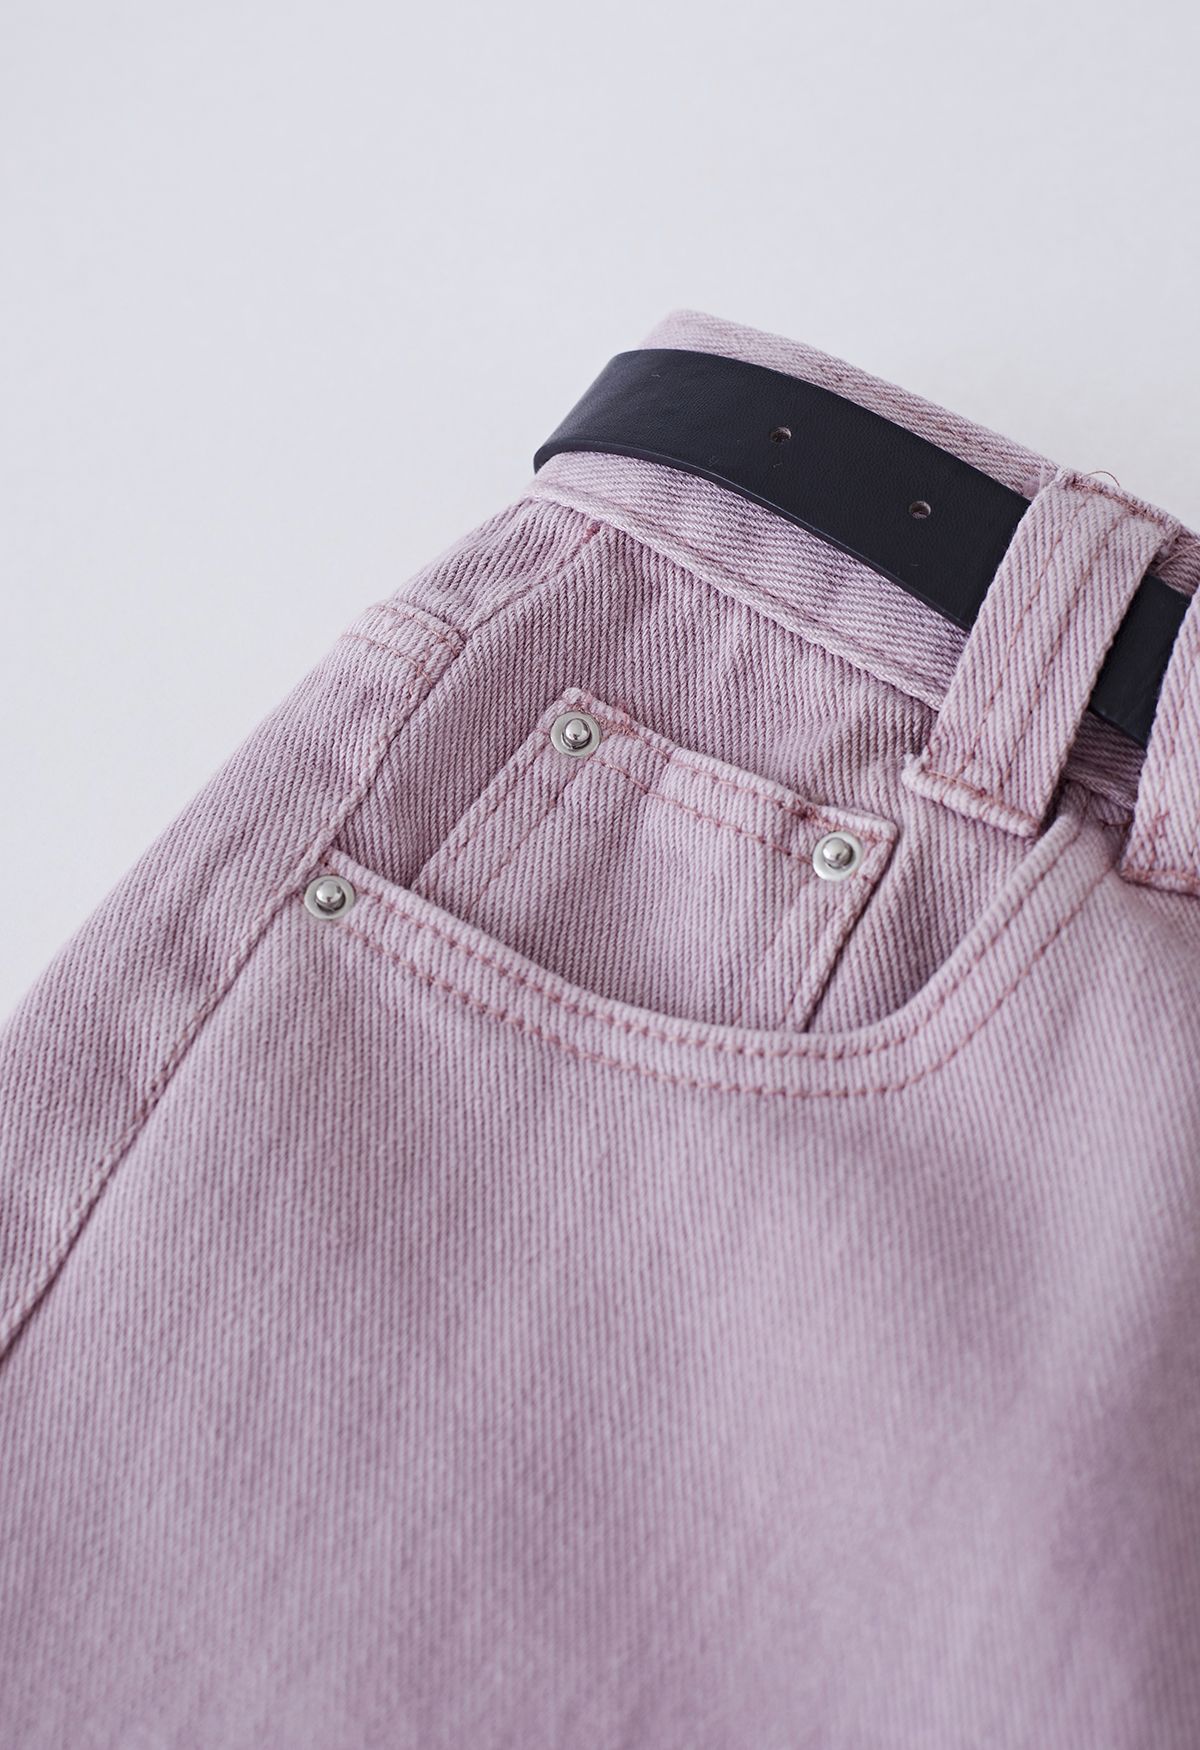 Distressed Straight-Leg Belted Jeans in Lilac